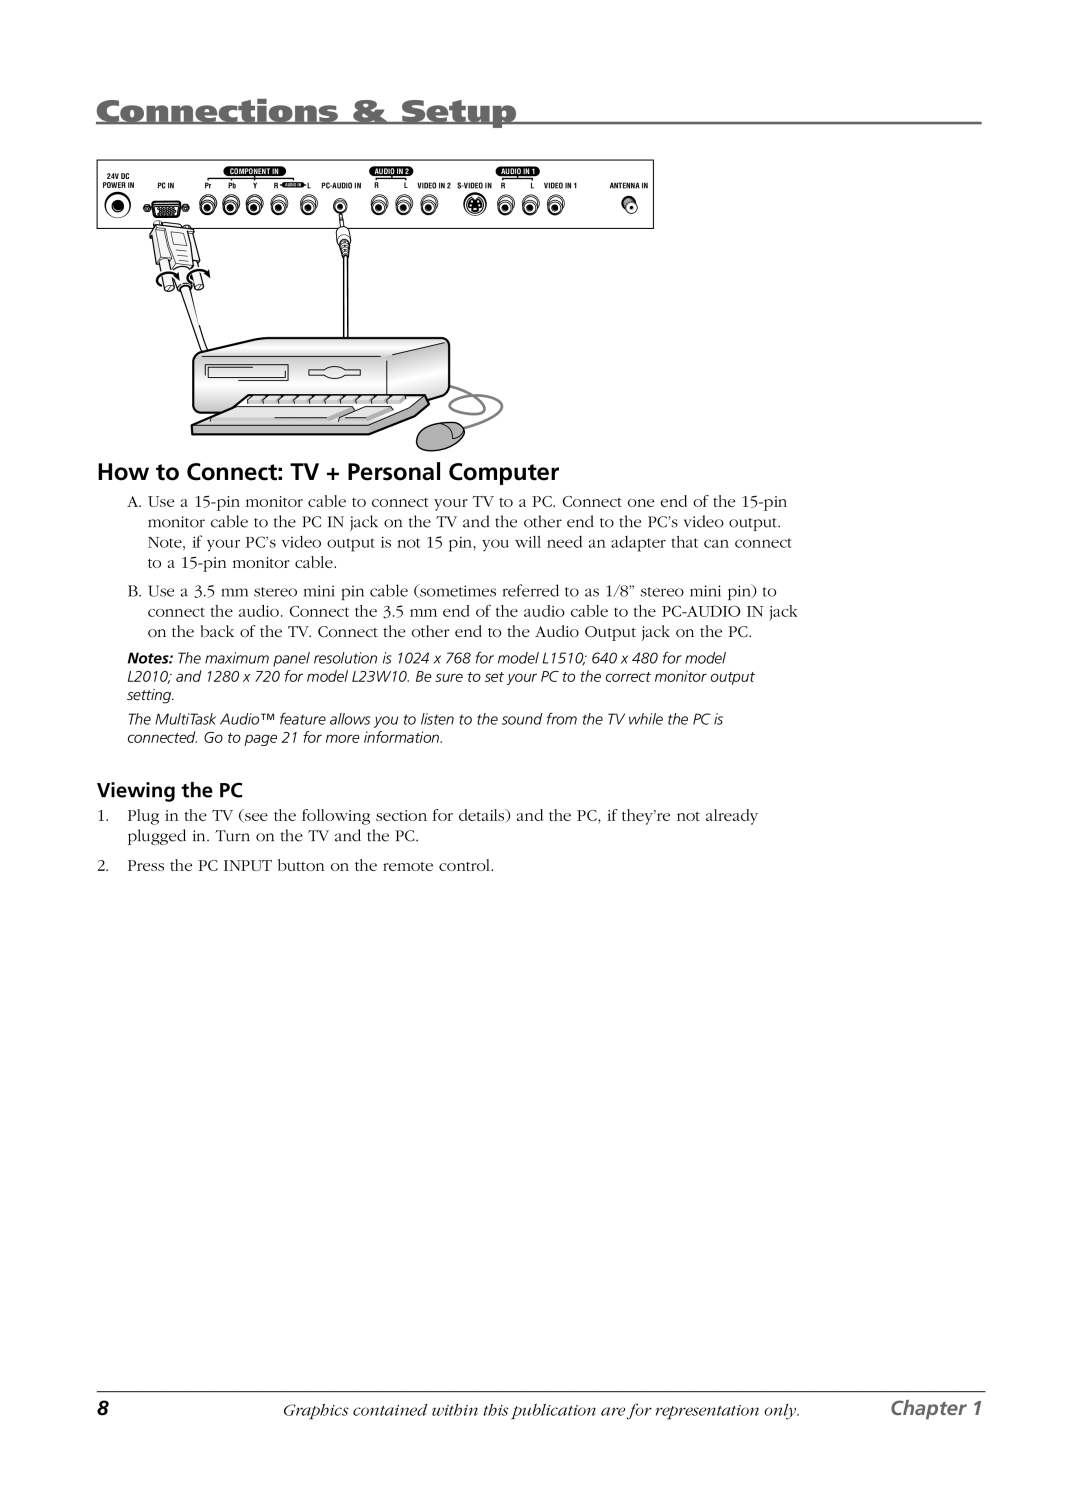 RCA L2010, L23W10, L1510 manual How to Connect TV + Personal Computer, Viewing the PC, Connections & Setup, Chapter 